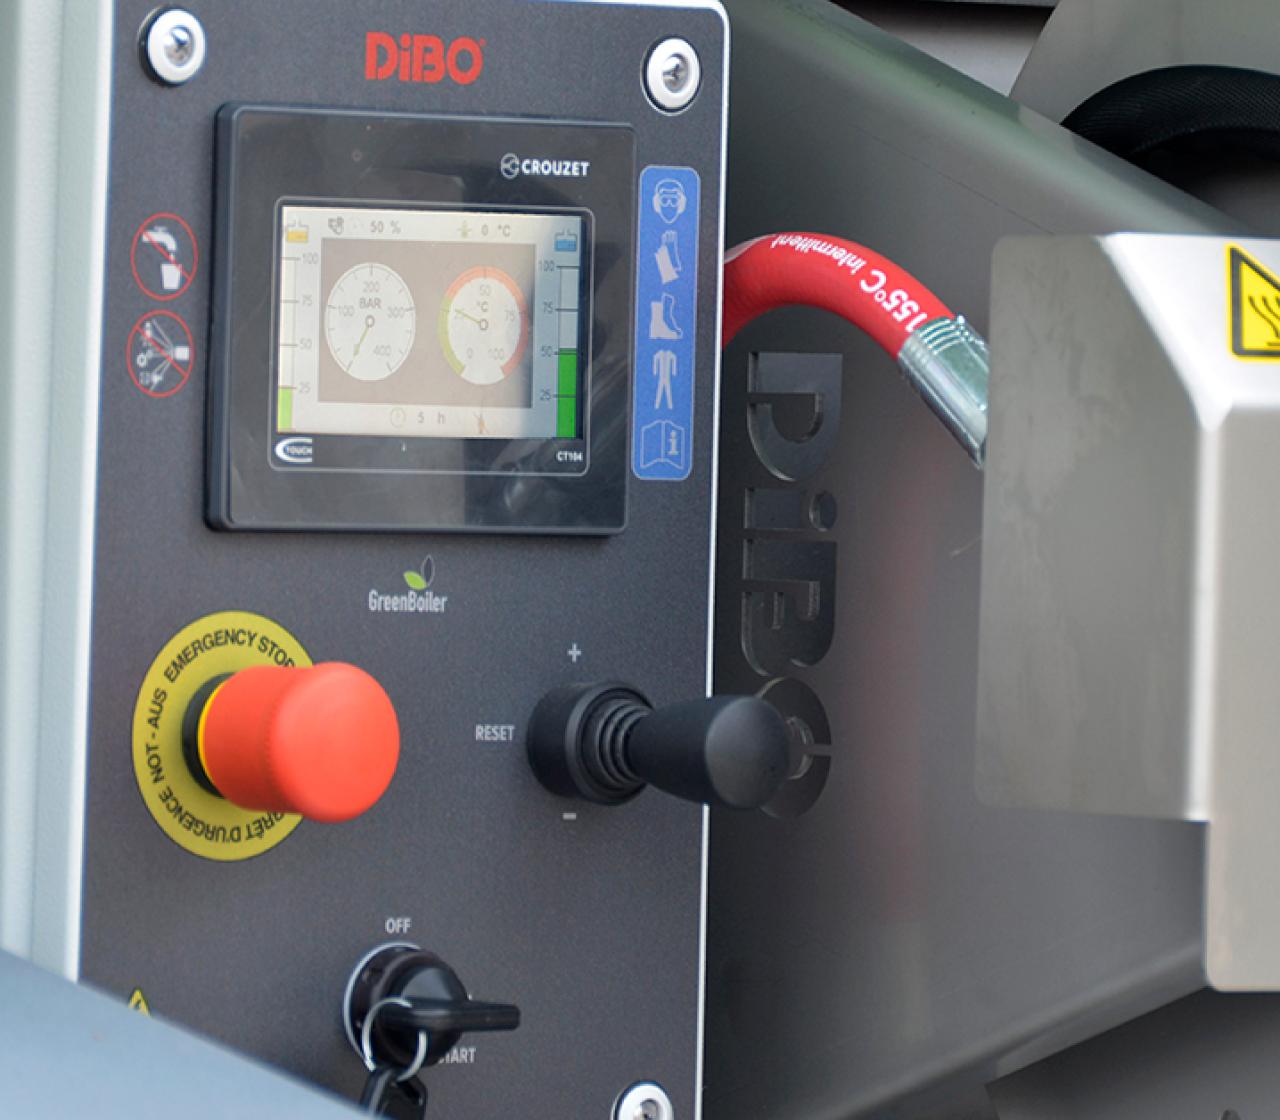 DiBO JMB-S digital control with joystick for convenient operation with gloves